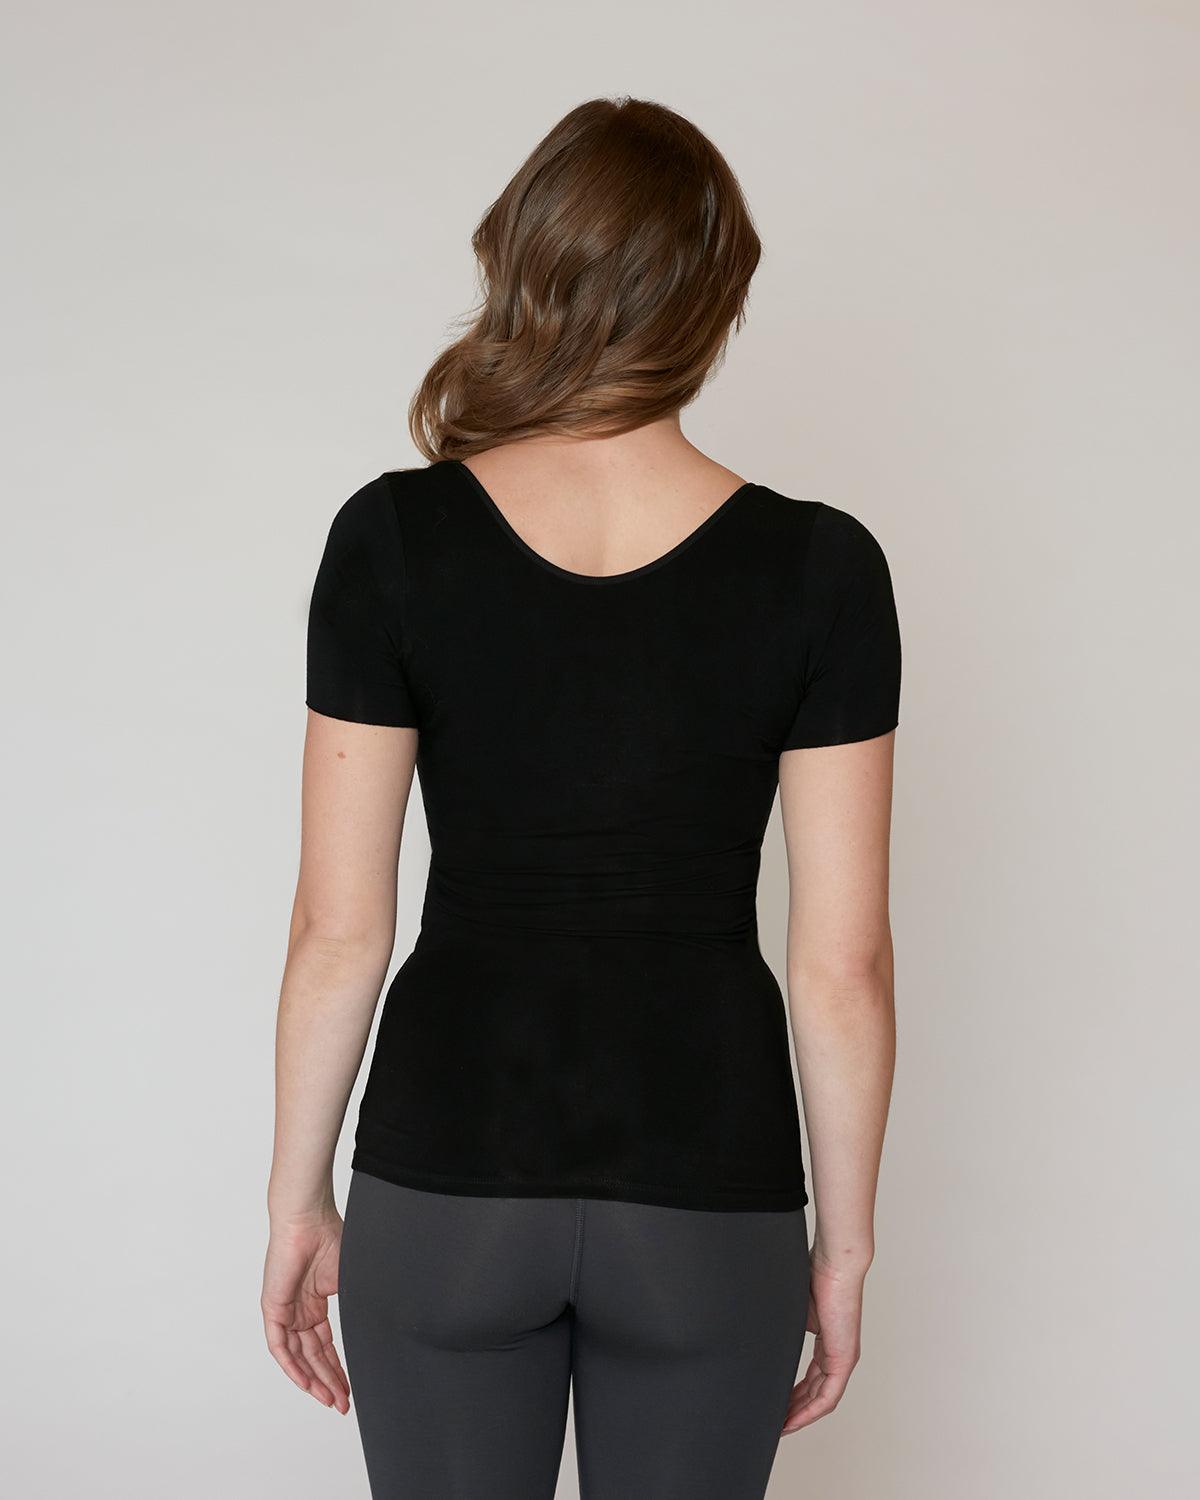 "#color_black| Siobhan is 5'8.5" and wears a size S